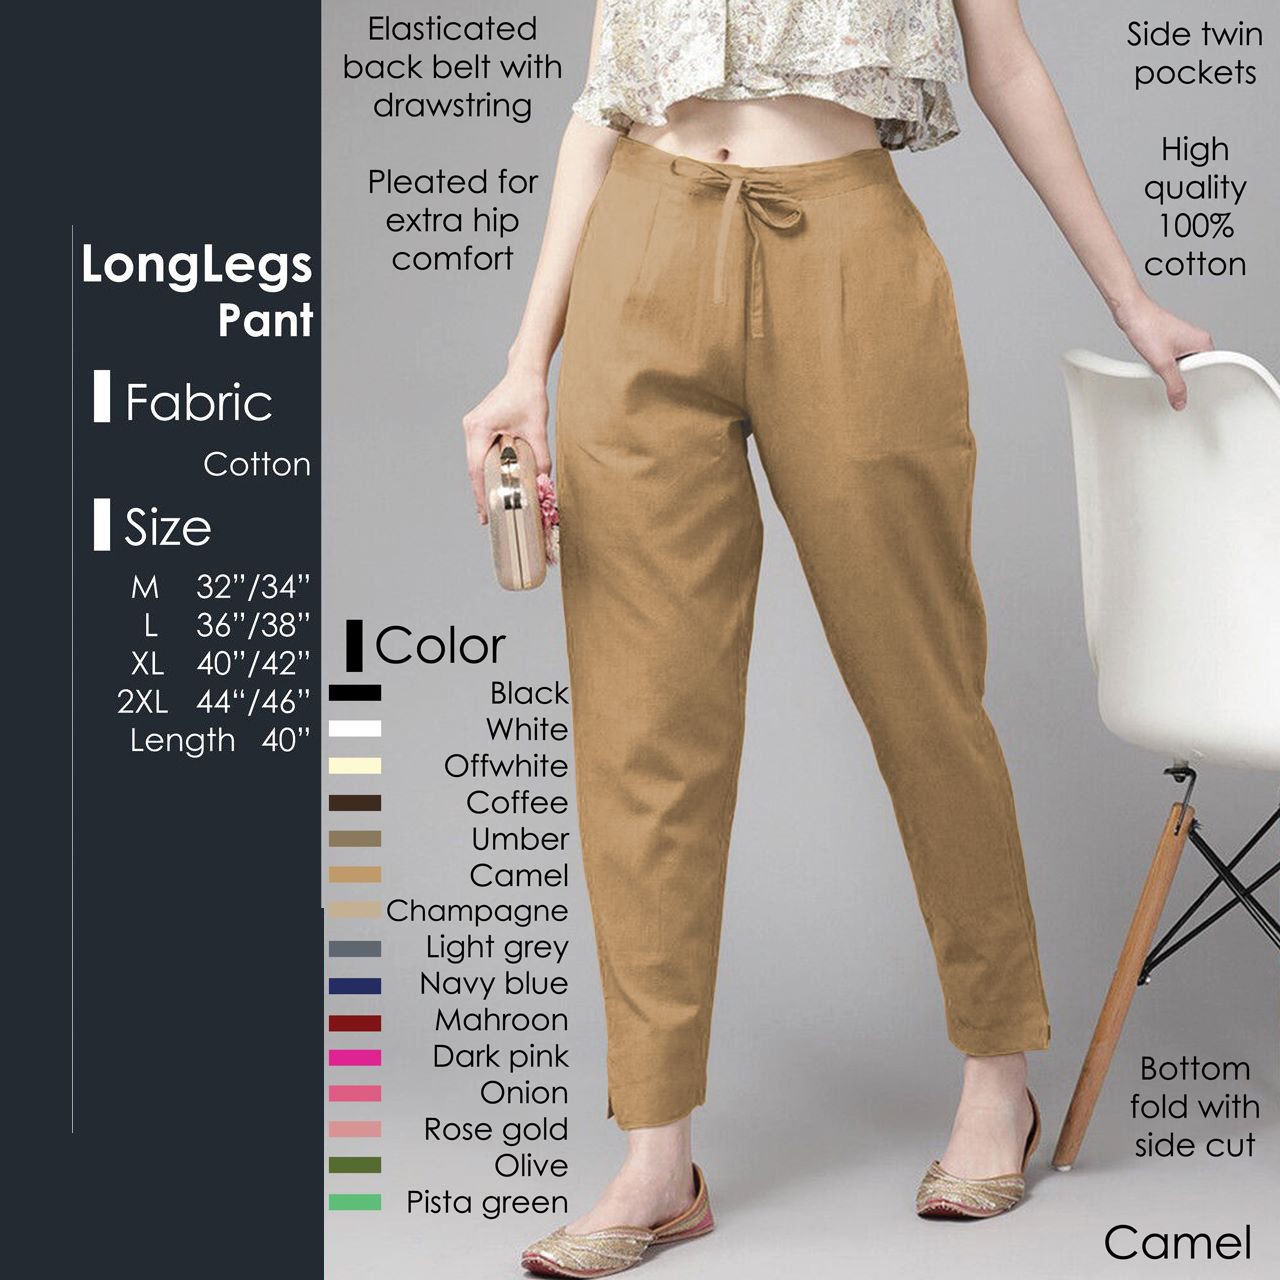 Long legs Pants – The she collection